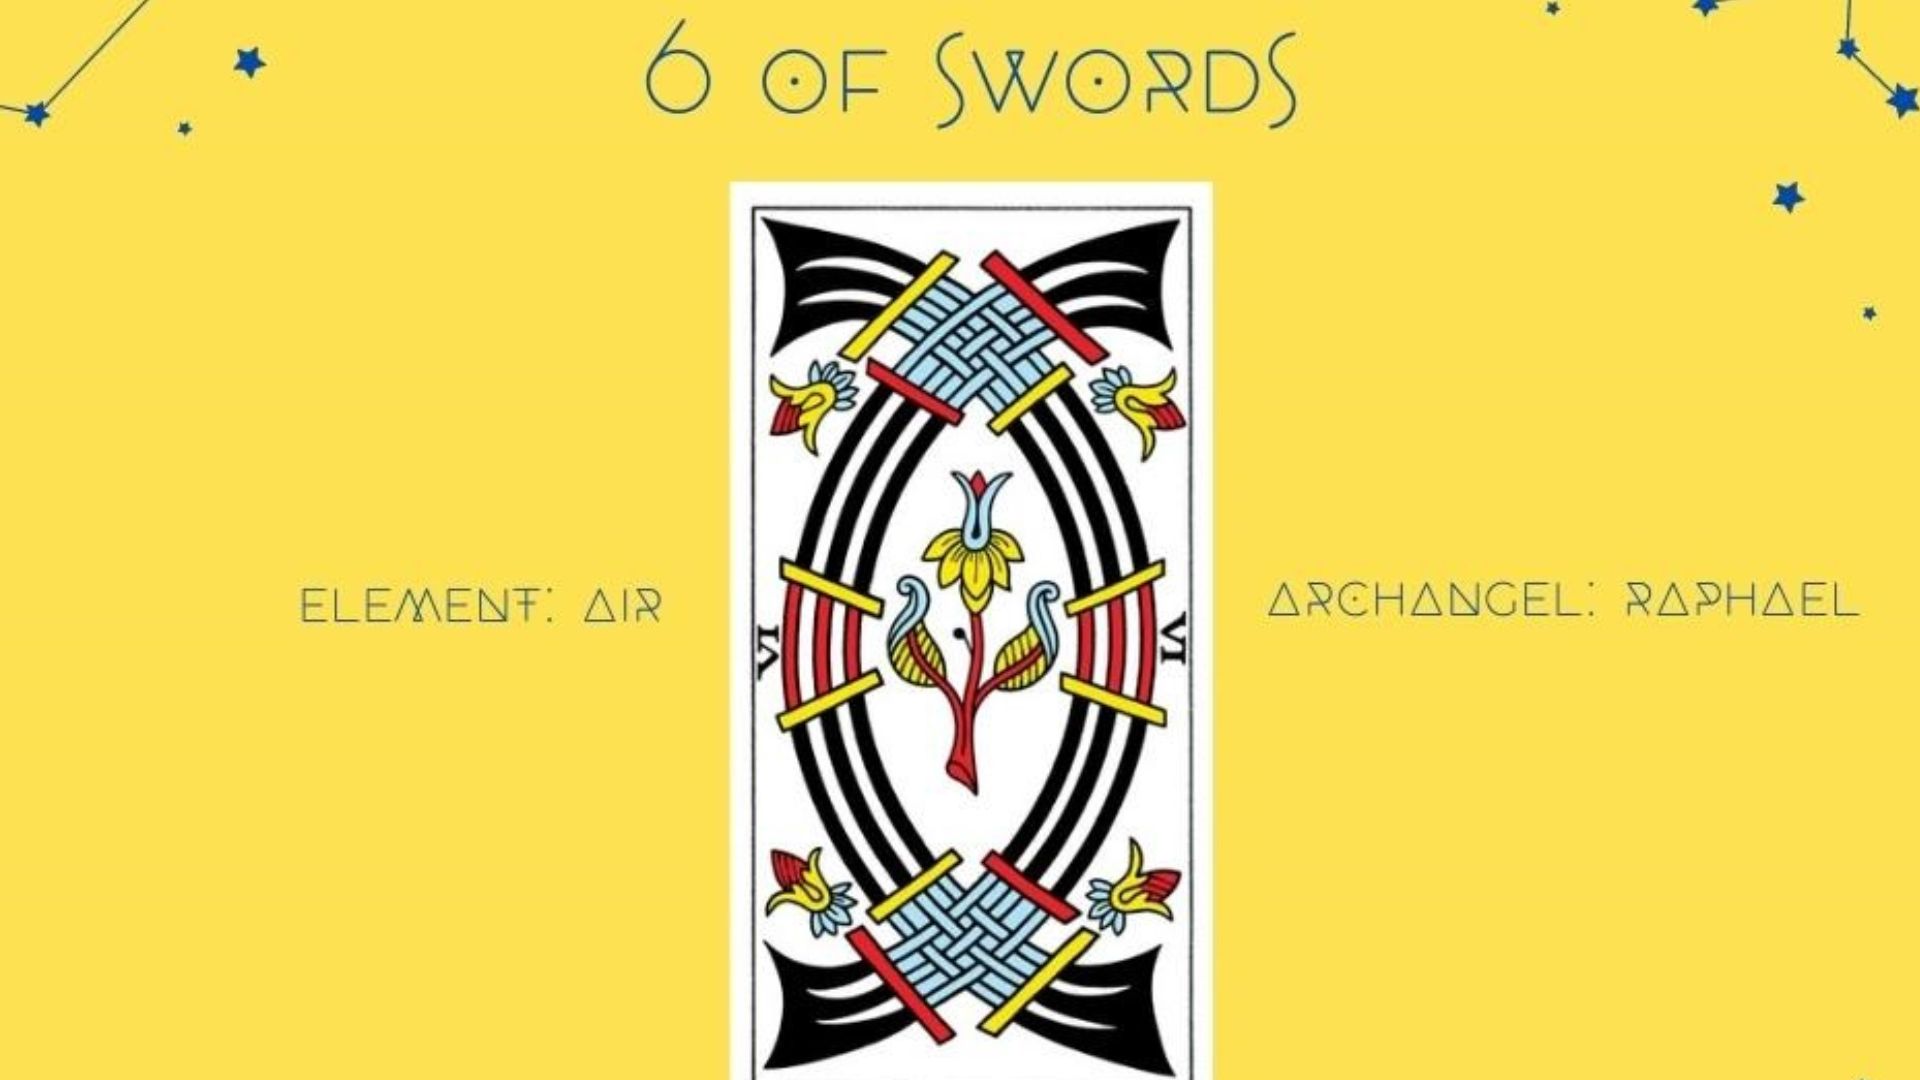 6 Of Swords Tarot Card In Yellow Background